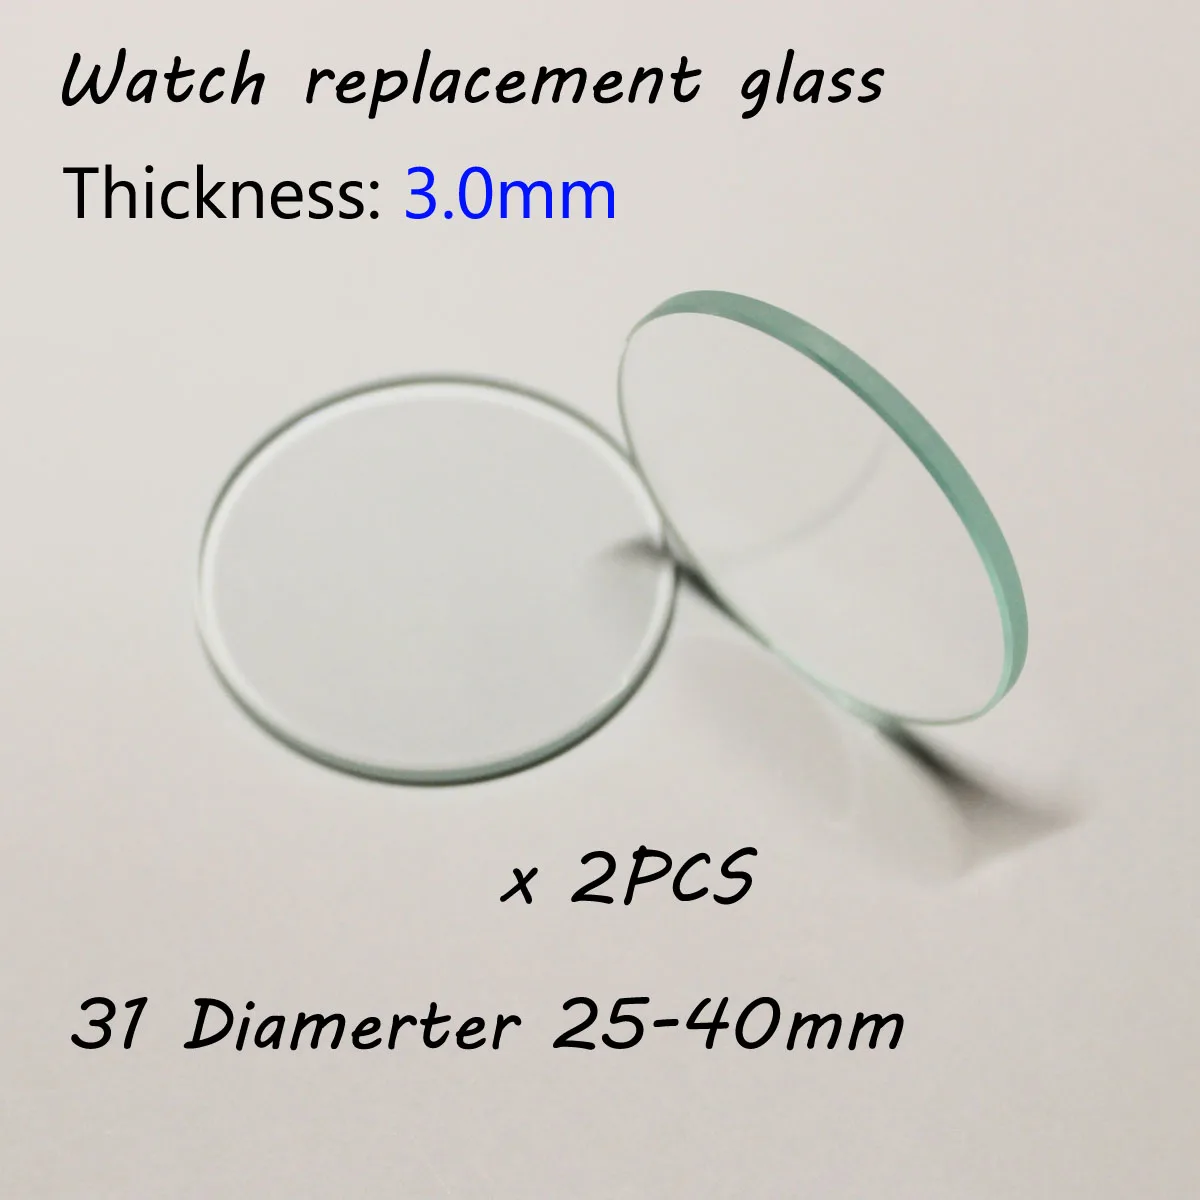 2Pcs 25mm - 40mm Diameter Round Watch Glass 3mm Thick Replacement Flat ...